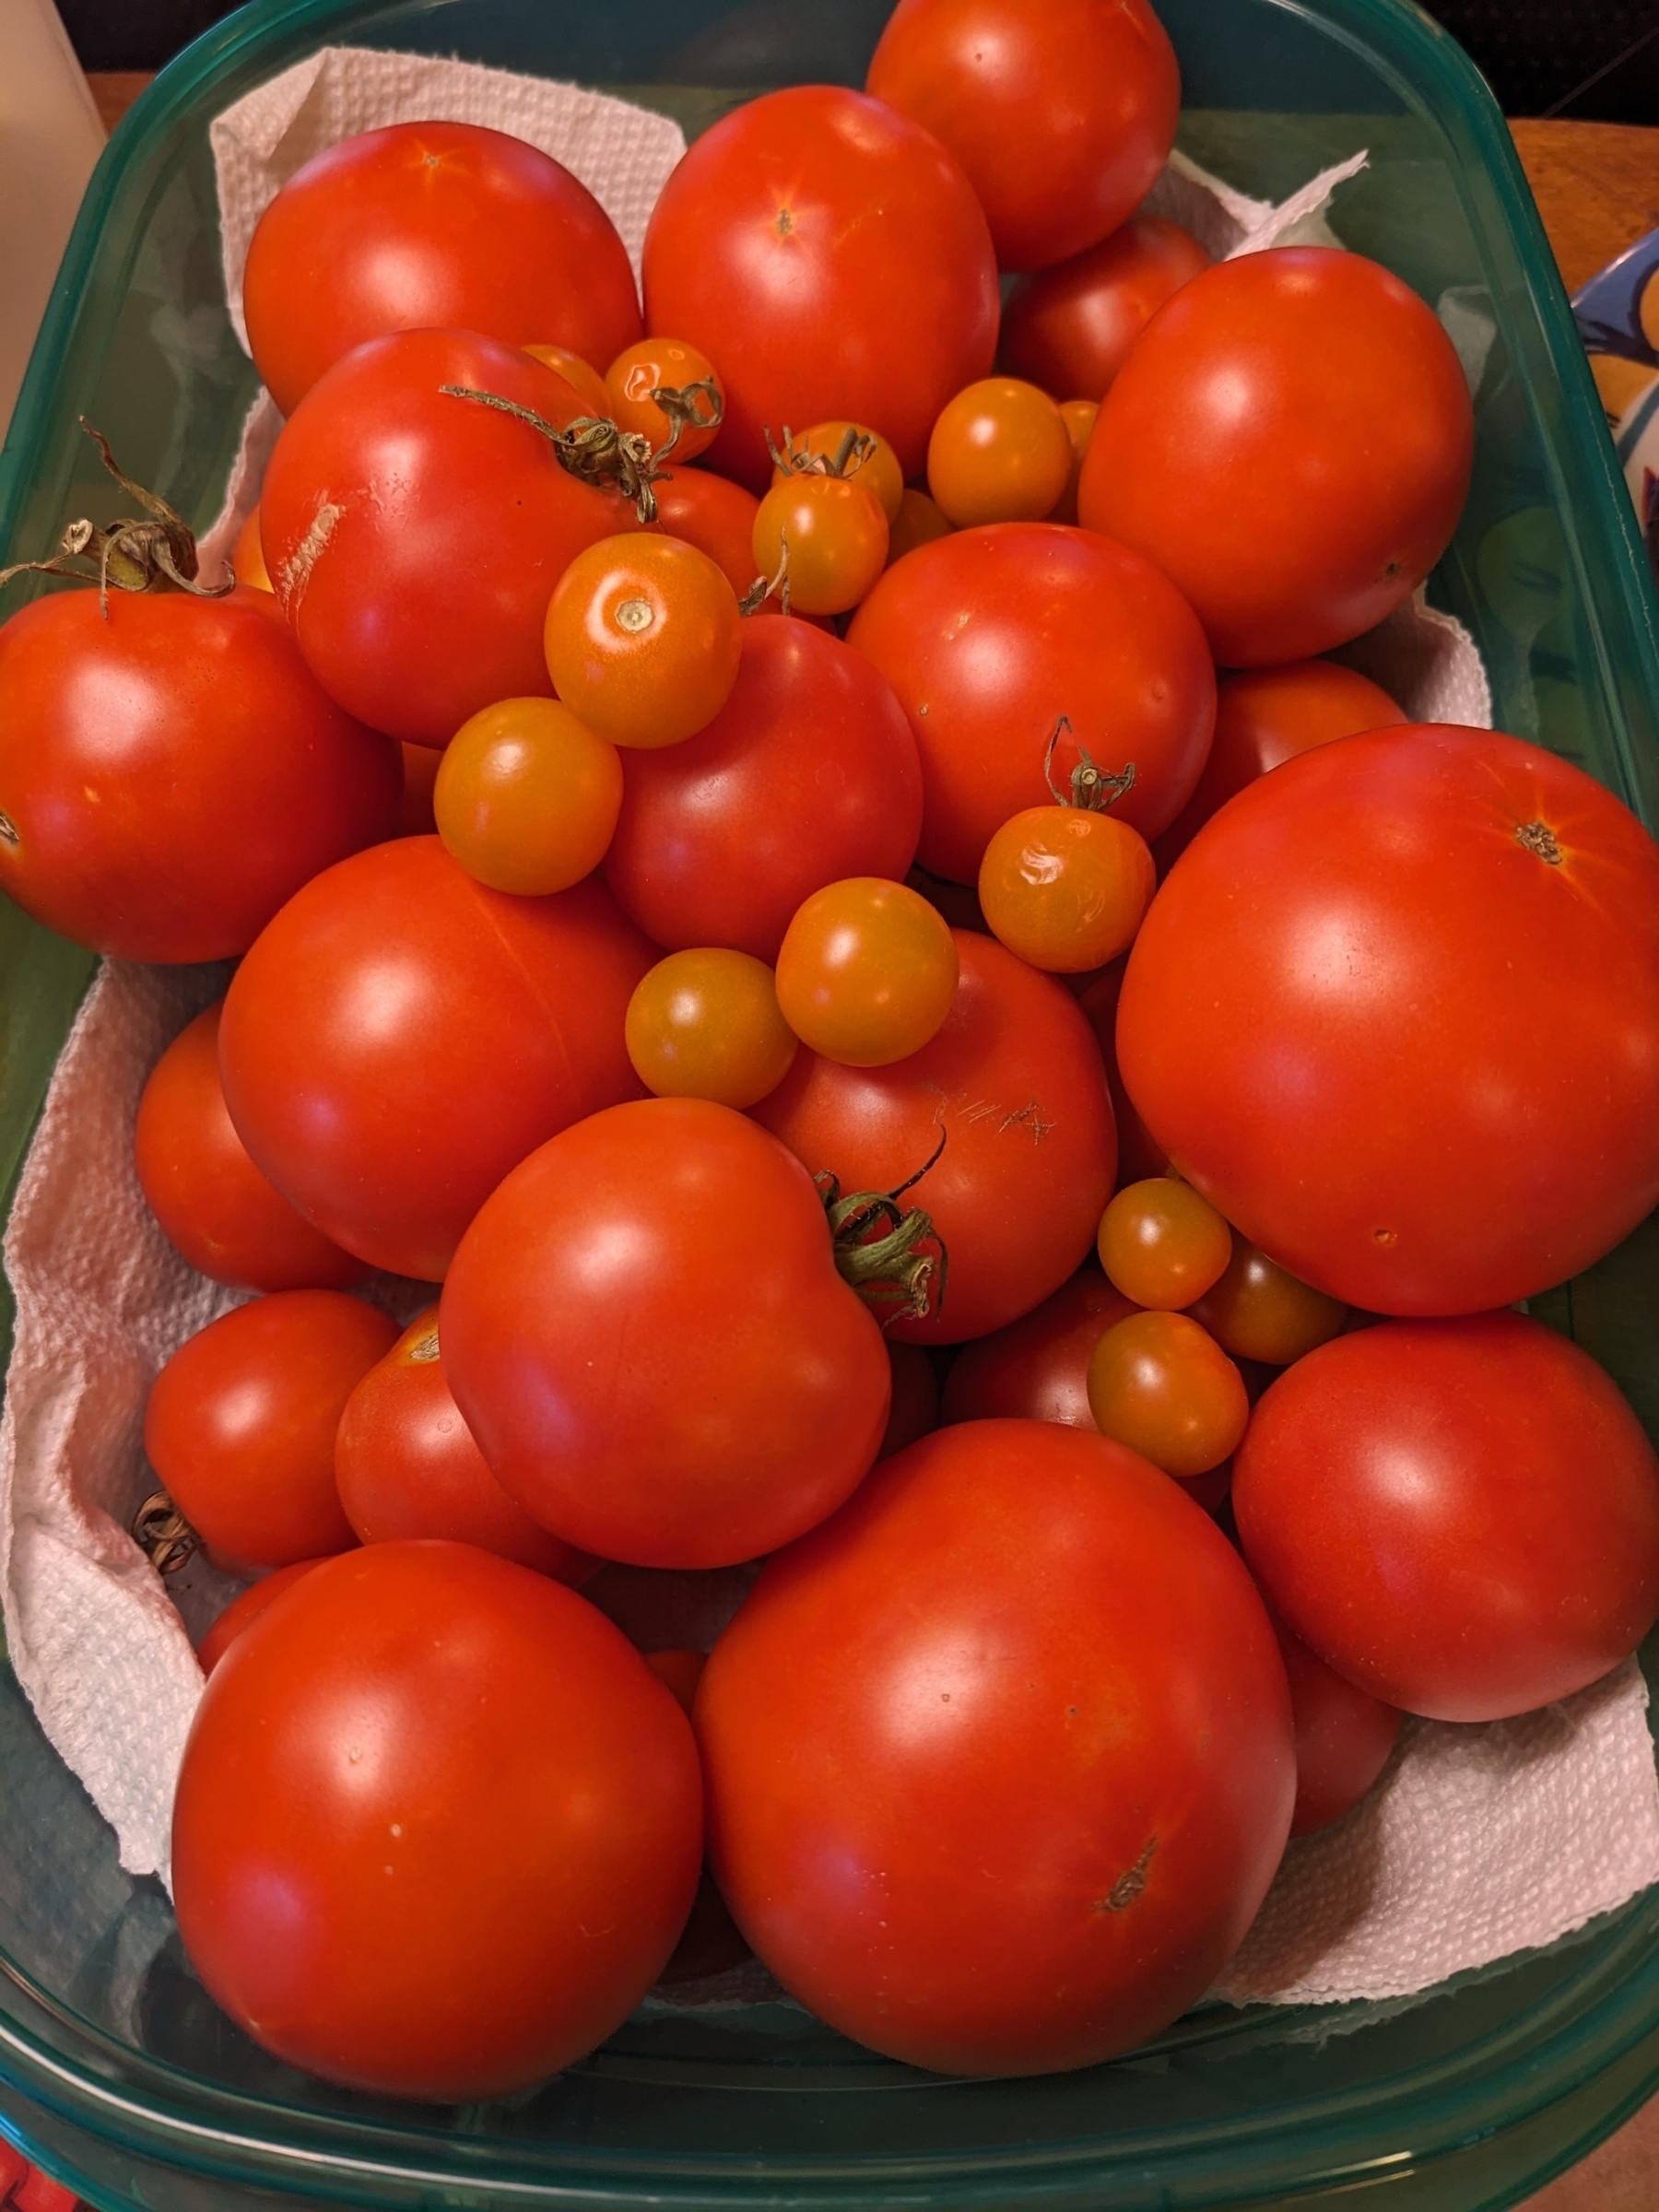 A container full of bright red tomatoes.